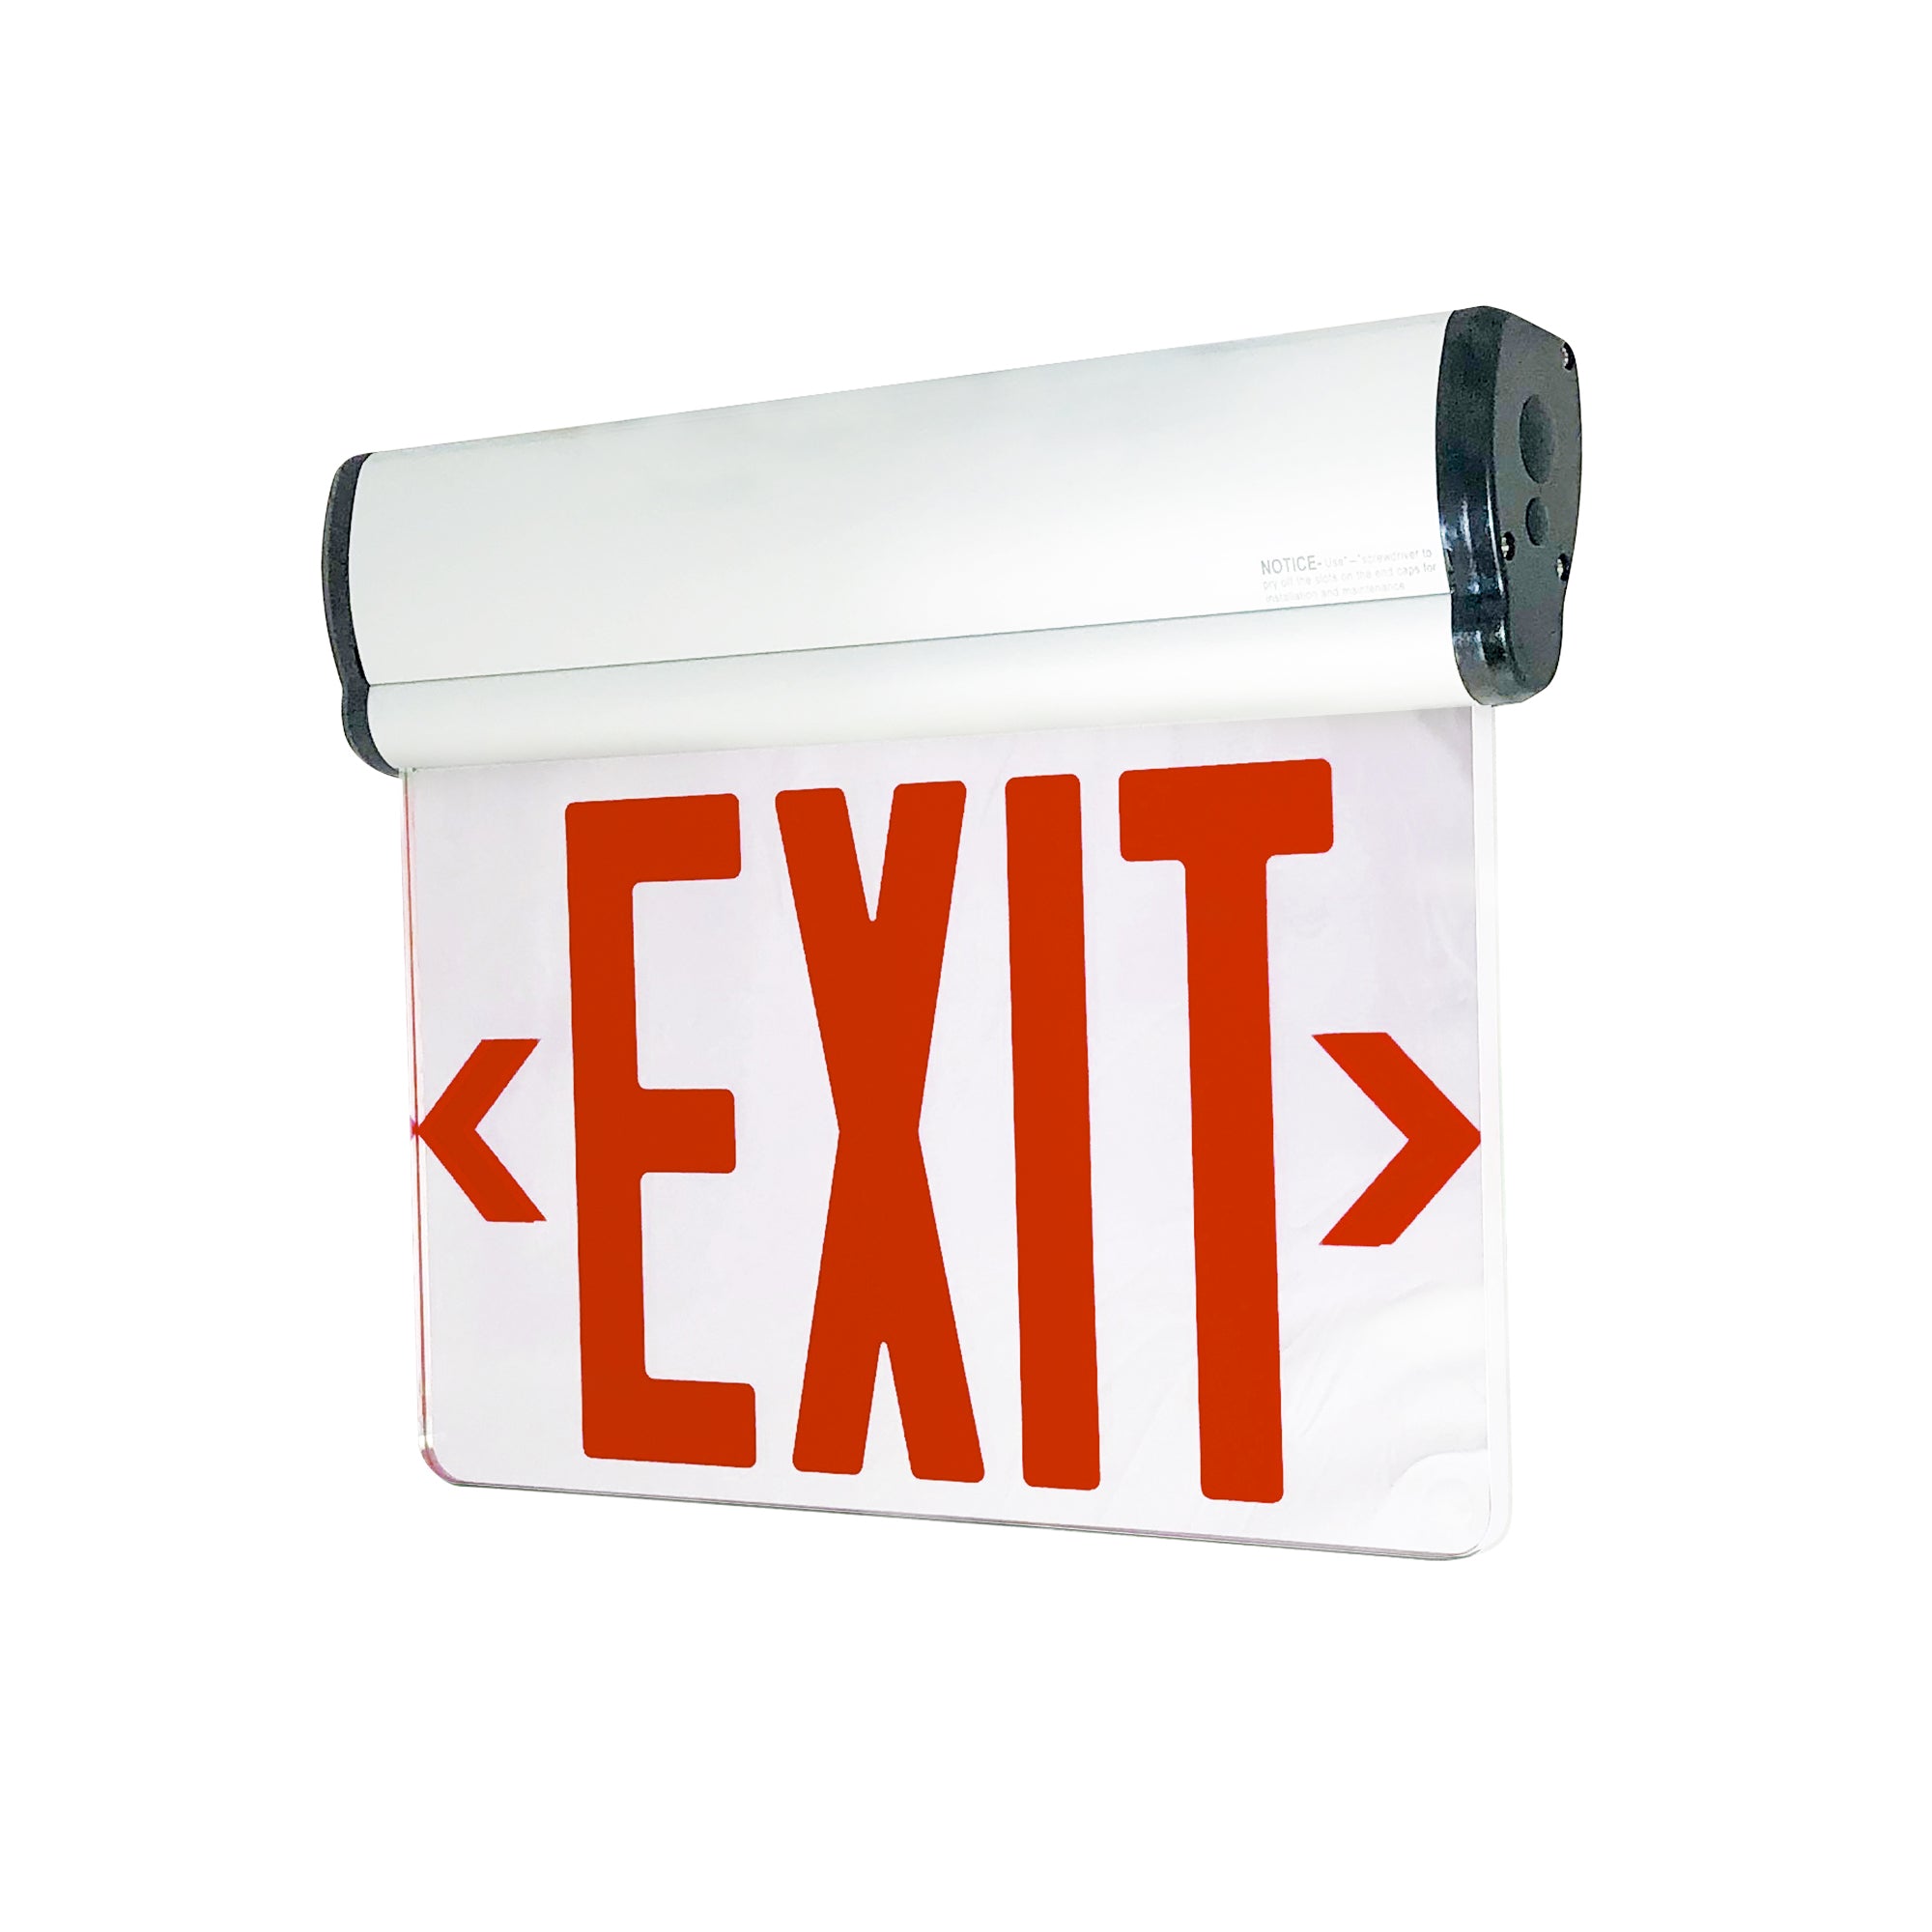 Nora Lighting NX-811-LEDRMW - Exit / Emergency - Surface Adjustable LED Edge-Lit Exit Sign, 2 Circuit, 6 Inch Red Letters, Single Face / Mirrored Acrylic, White Housing